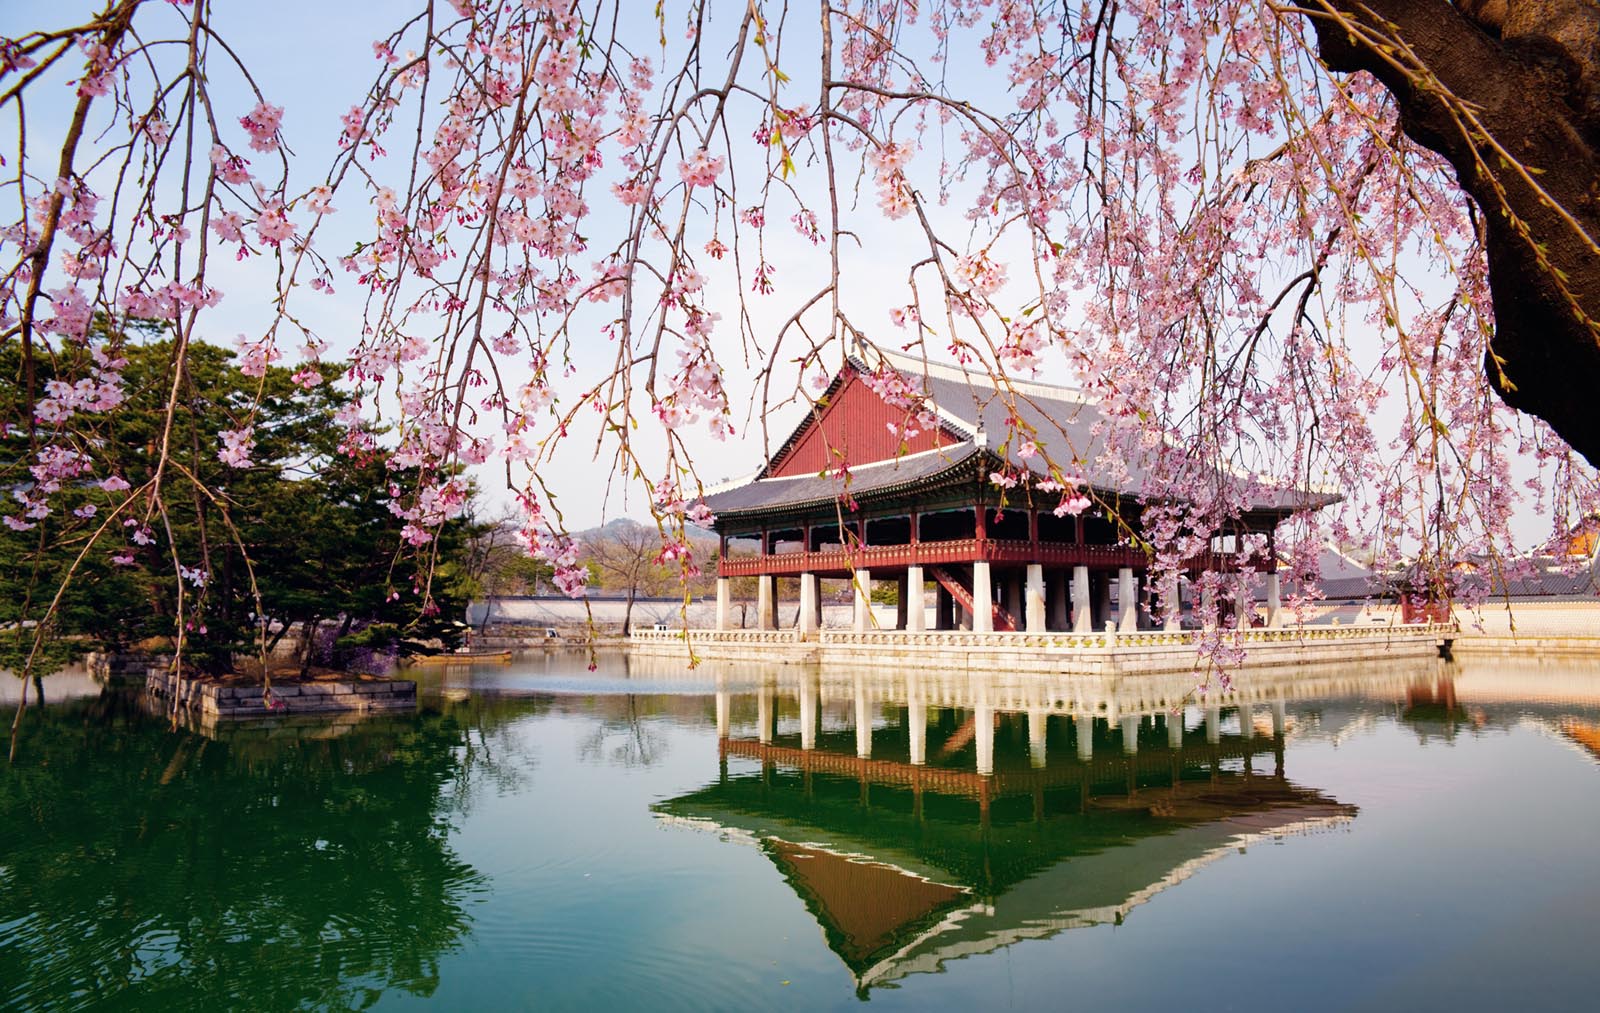 pagoda and cherry blossom by lake at palace in south korea